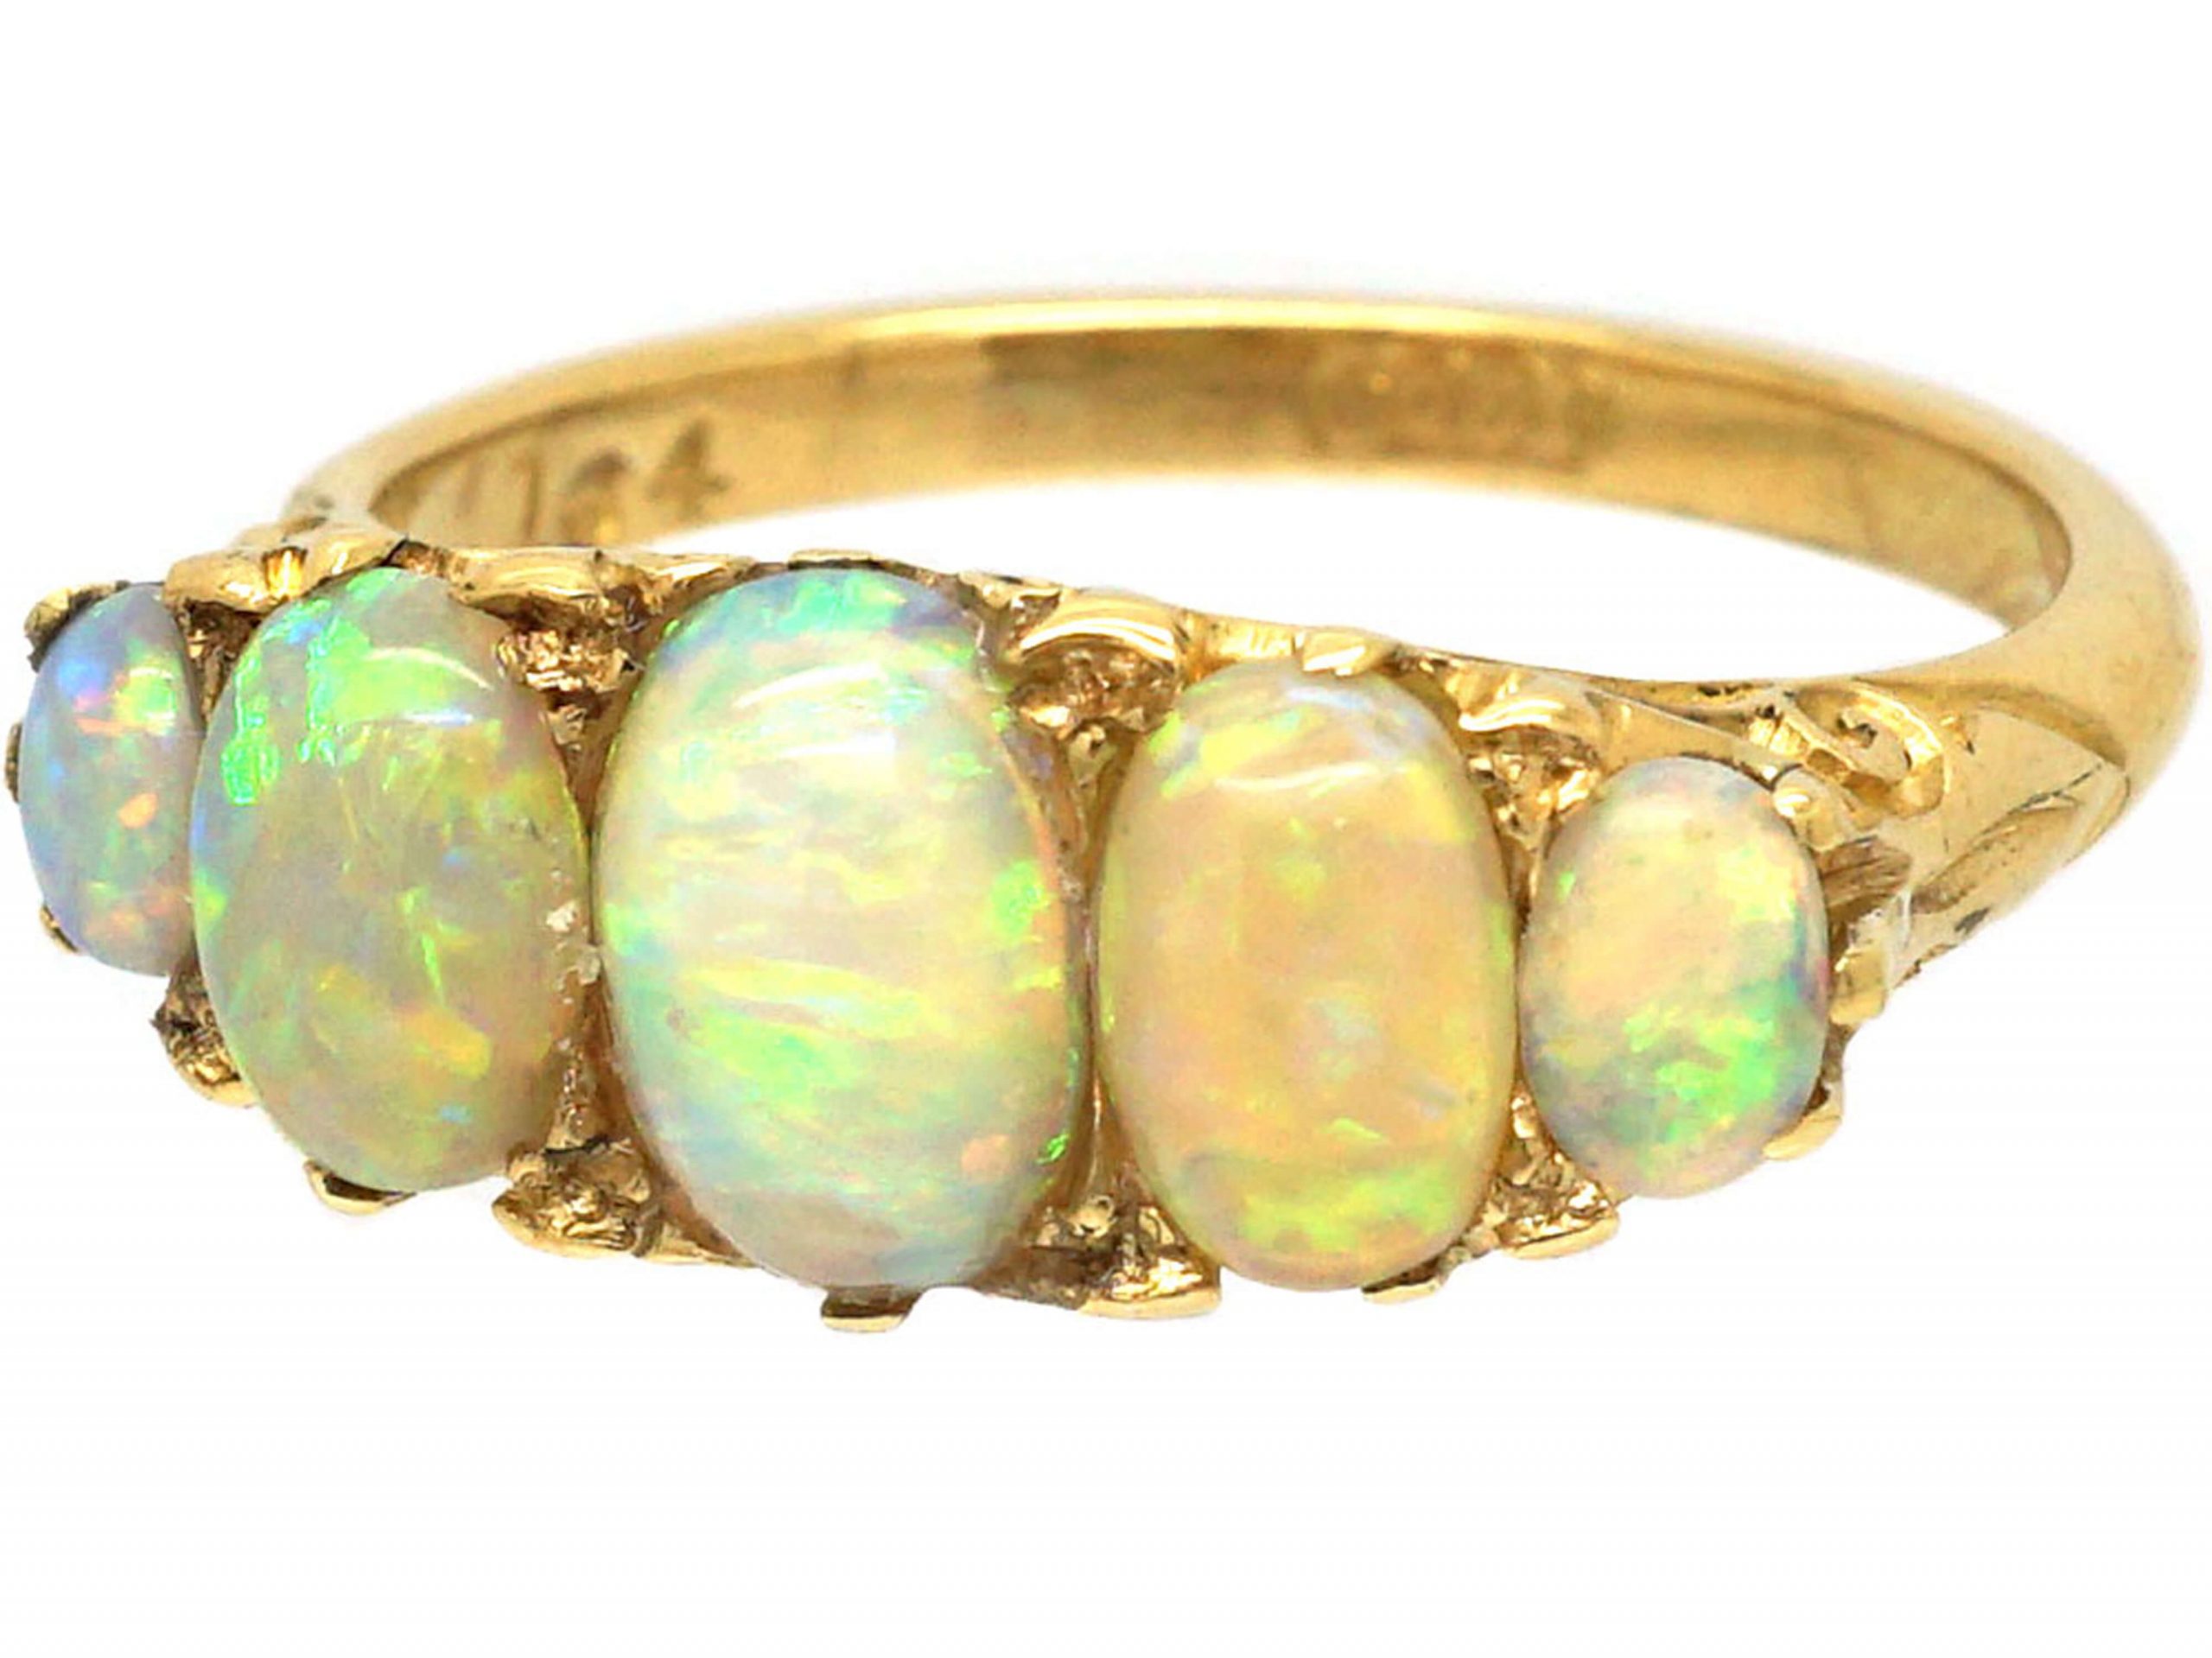 Edwardian 18ct gold and Five Stone Precious Opal Ring (294S) | The ...